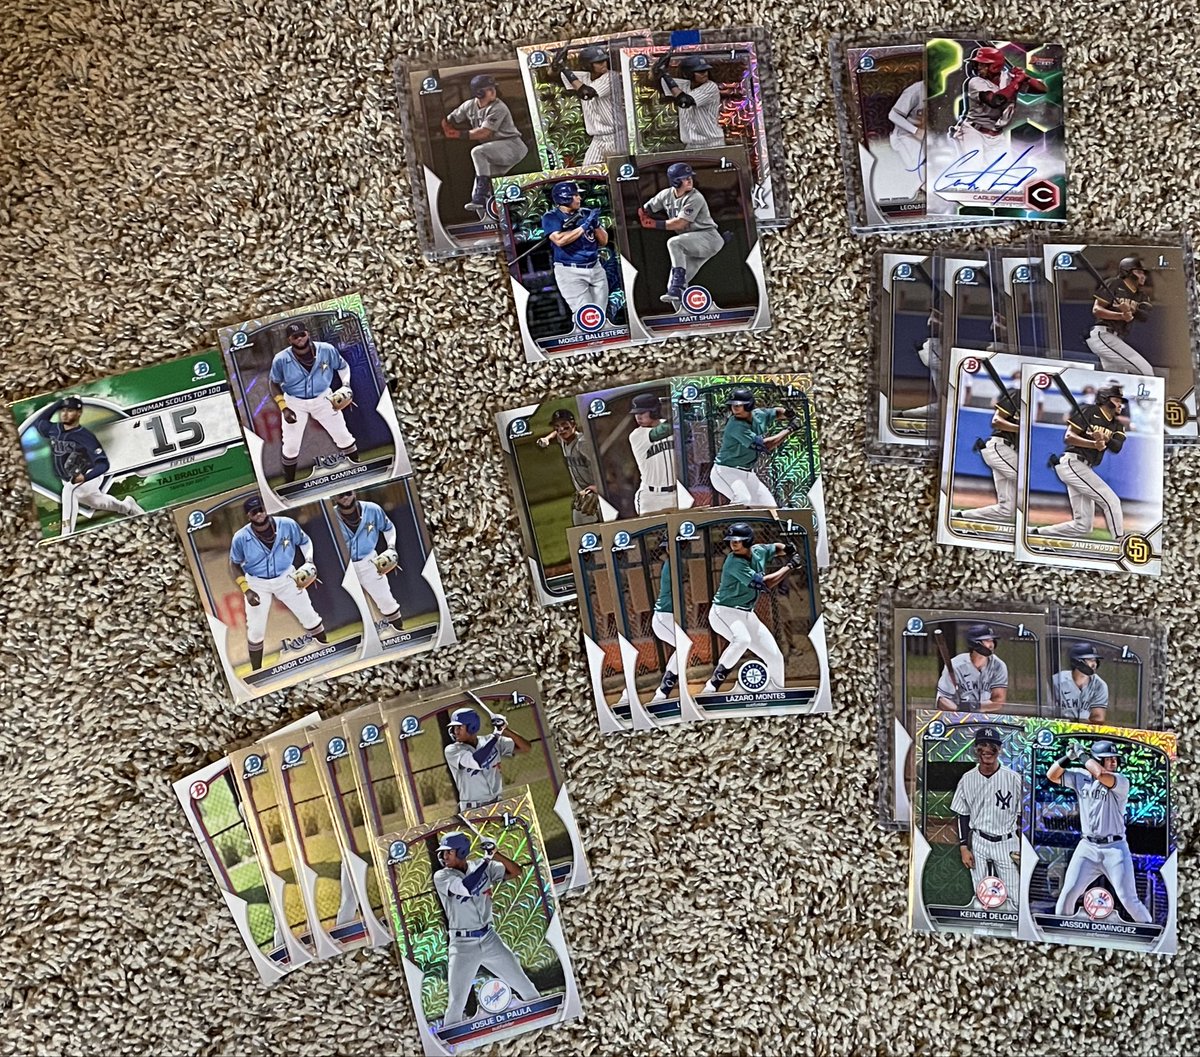 @Elliott0924 @davisdugout Each group $15  
One Shaw is refractor 
Farmelo and Young refractor